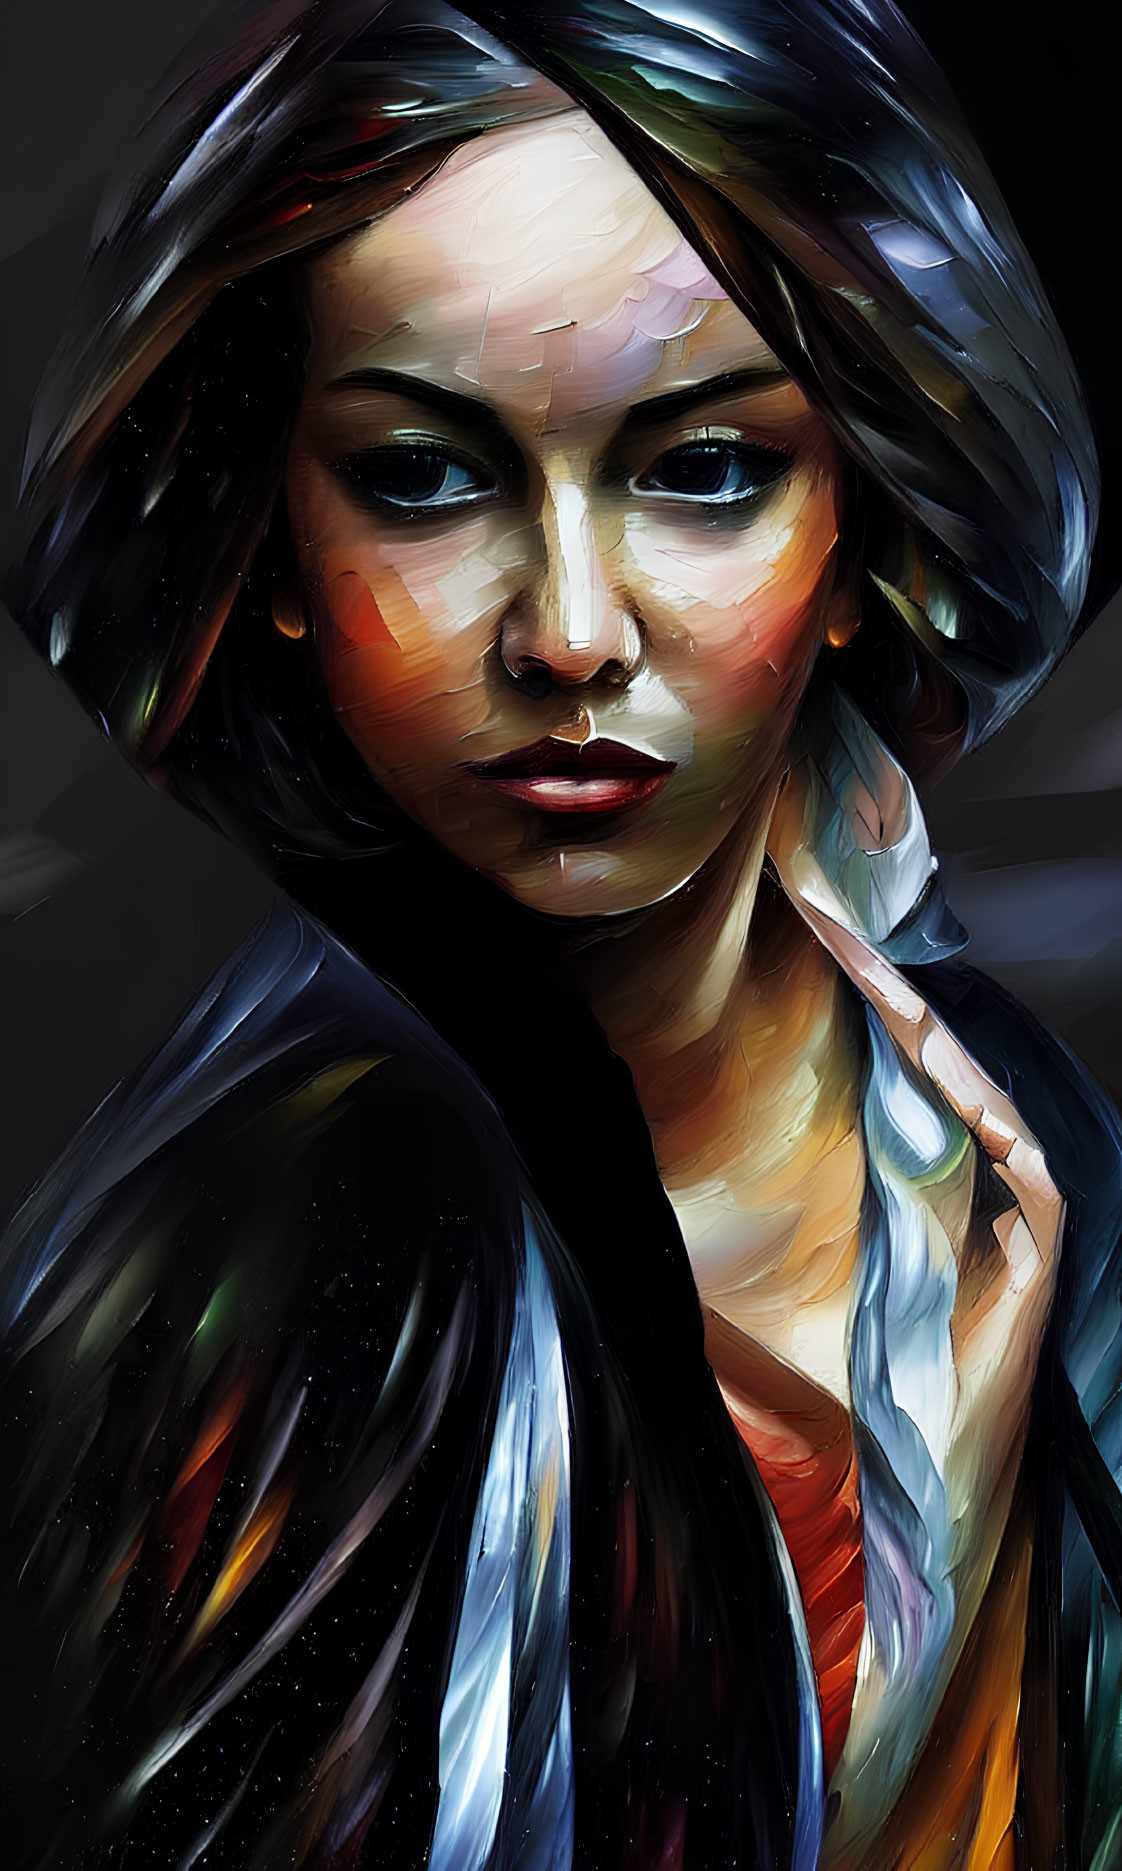 Colorful digital painting of a woman with bold brushstrokes.